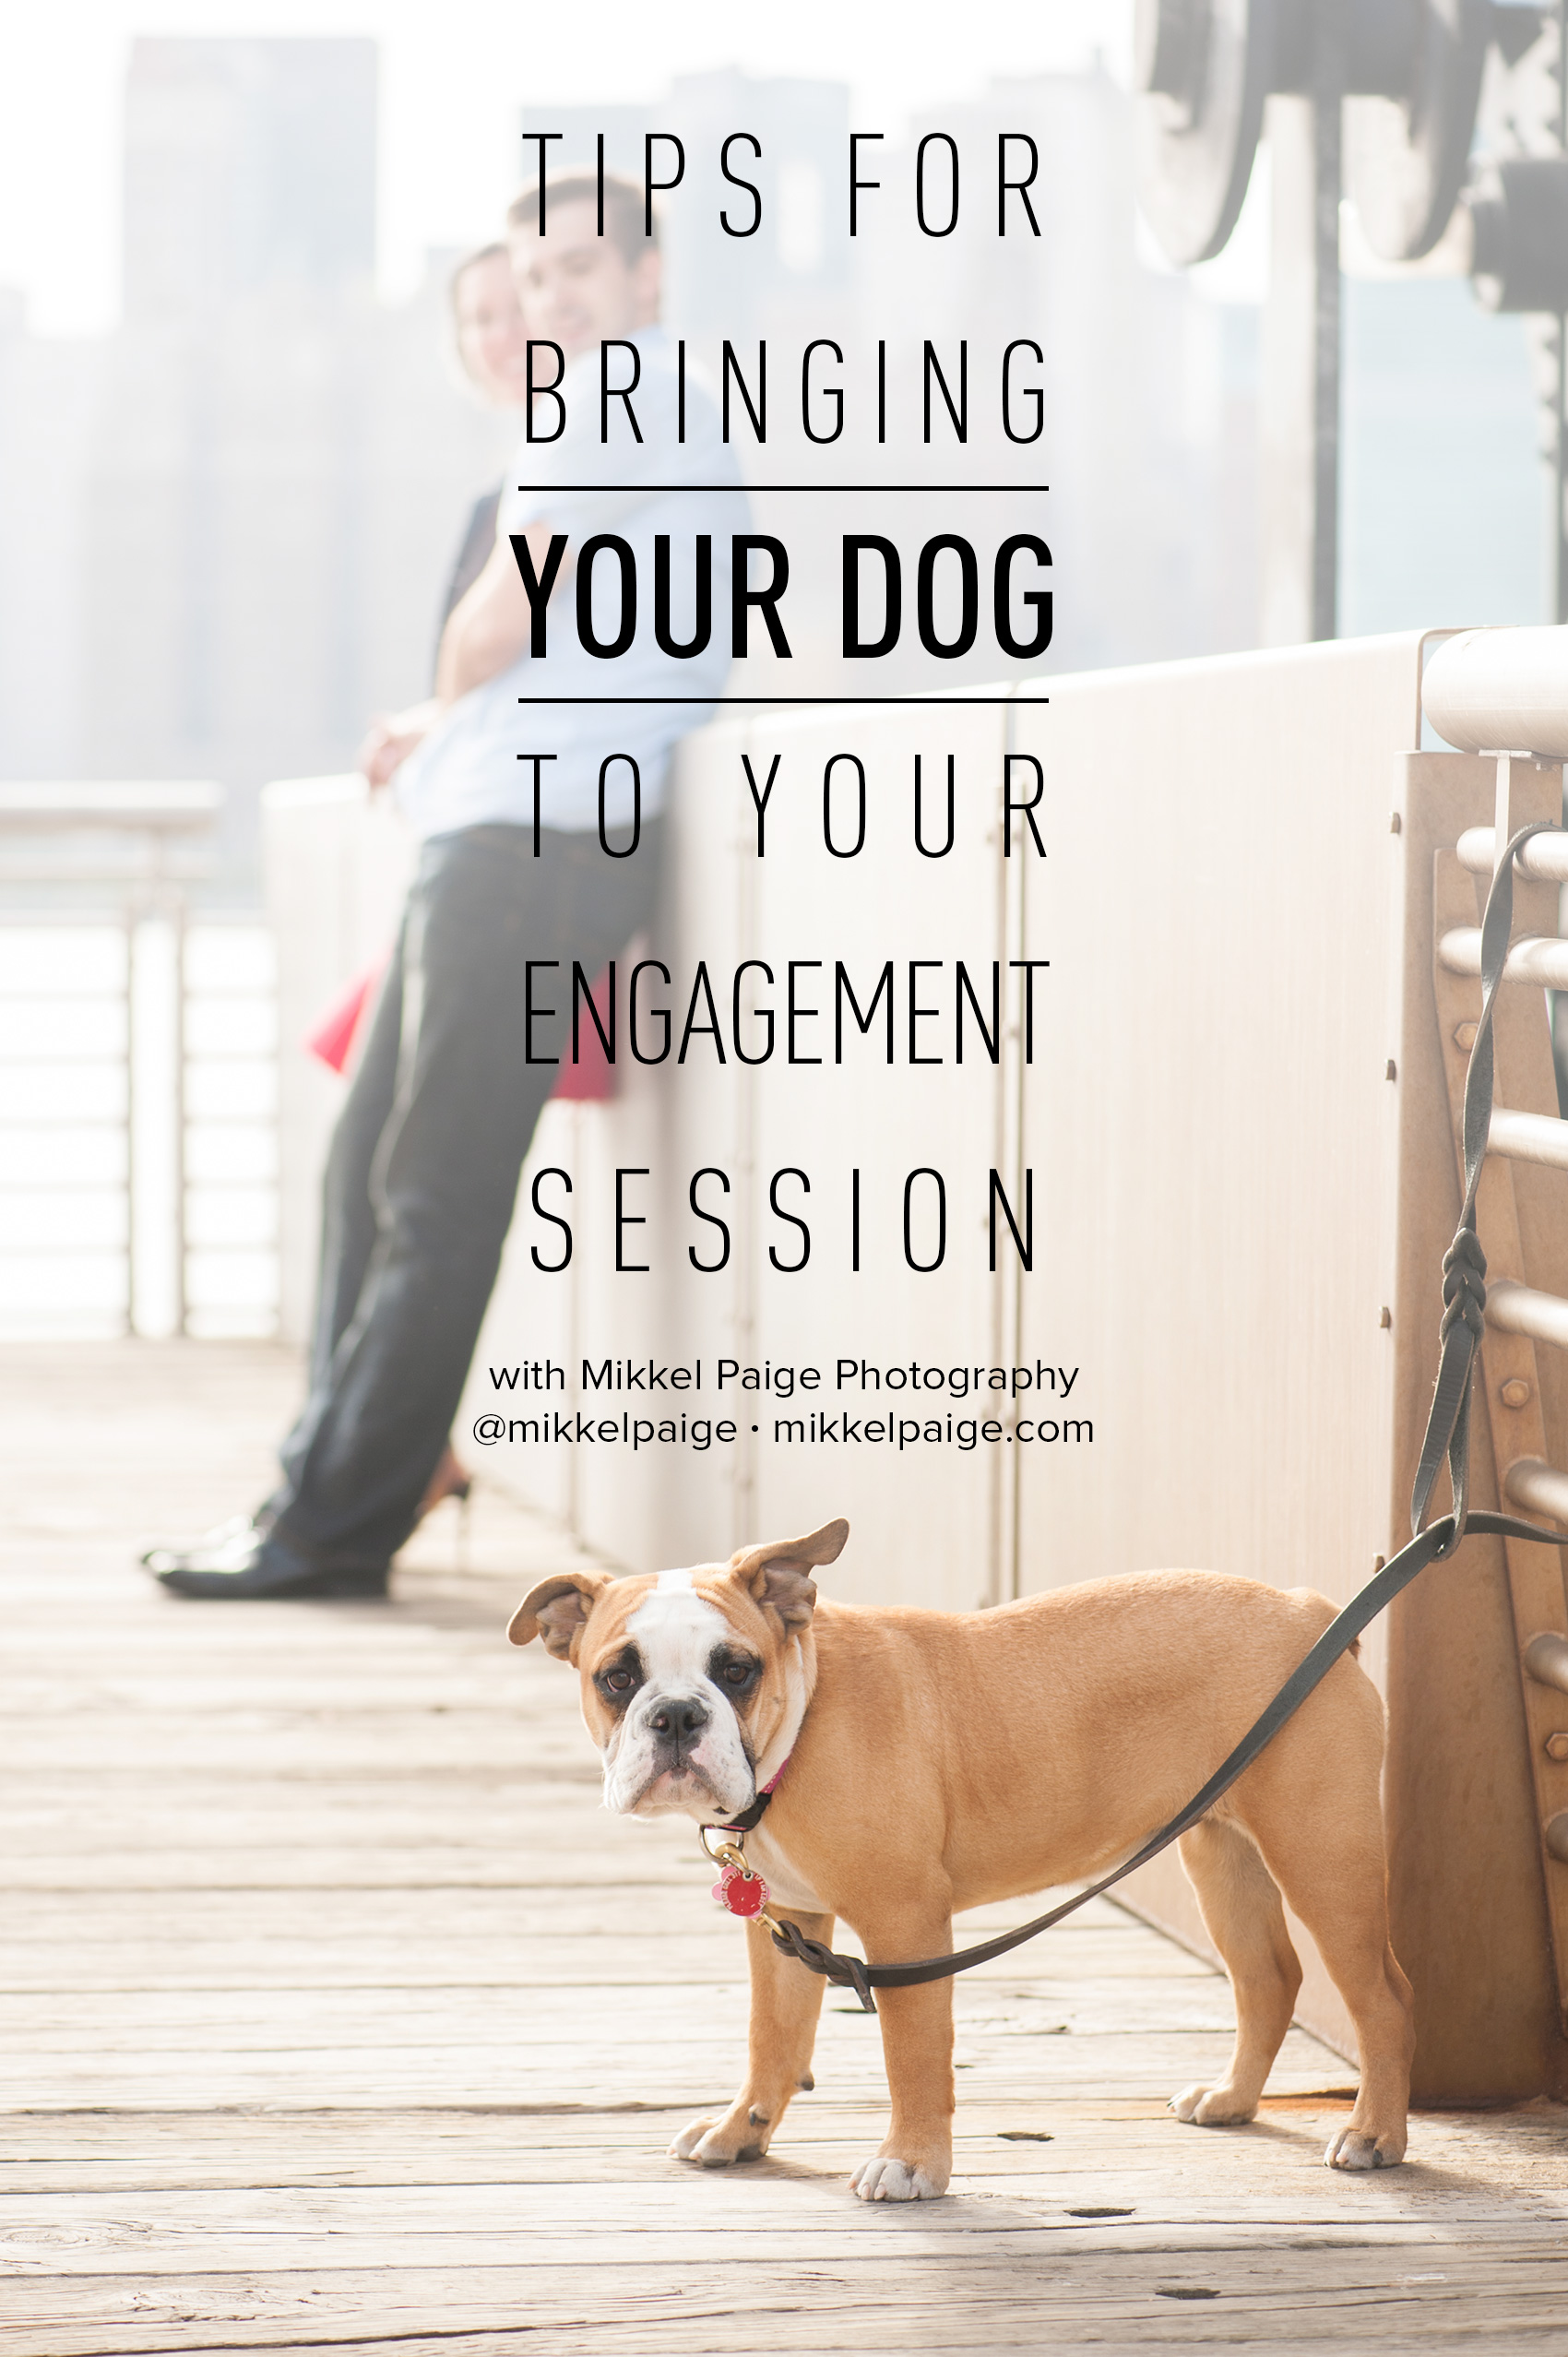 4 Tips for Bringing Your Dog to Your Engagement session with Mikkel Paige Photography, NYC and Raleigh based wedding photographer. From what tricks work to who needs to be there we have you covered! Click through for the complete scoop and photo ideas! #mikkelpaige #engagementphotoswithdog #engagementpictureswithdogs